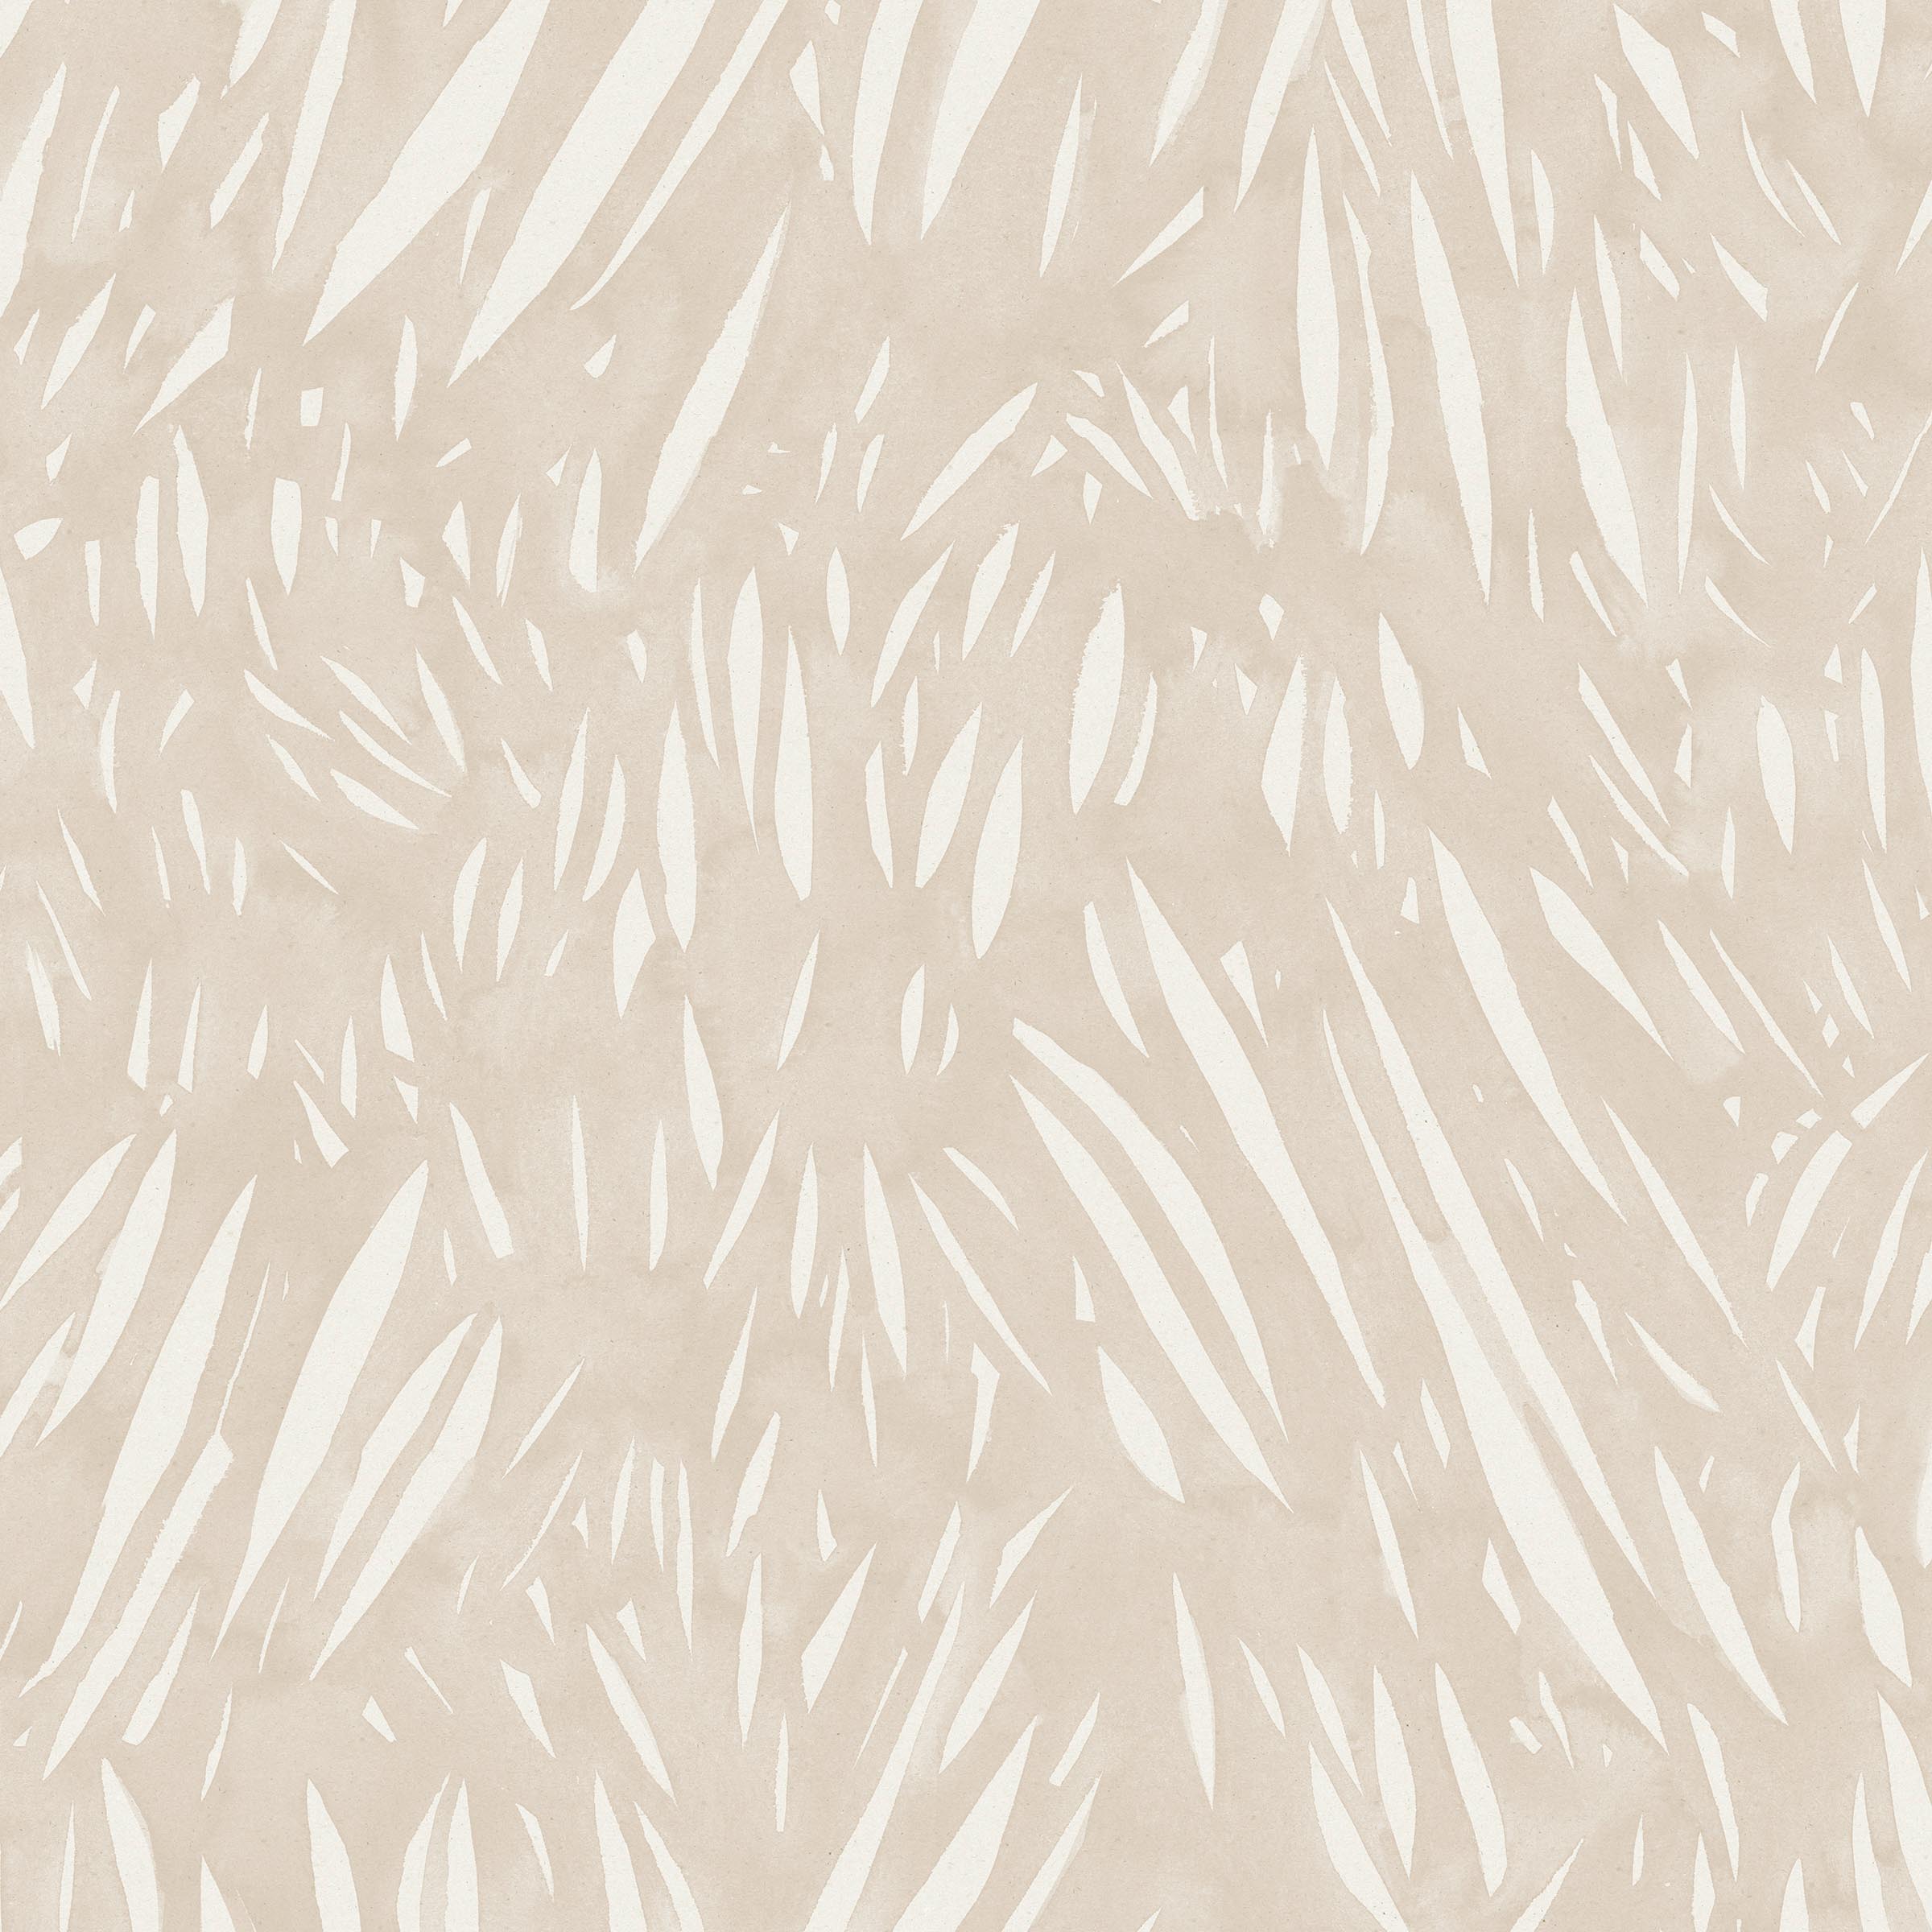 Detail of wallpaper in an abstract leaf pattern in white on a cream watercolor field.